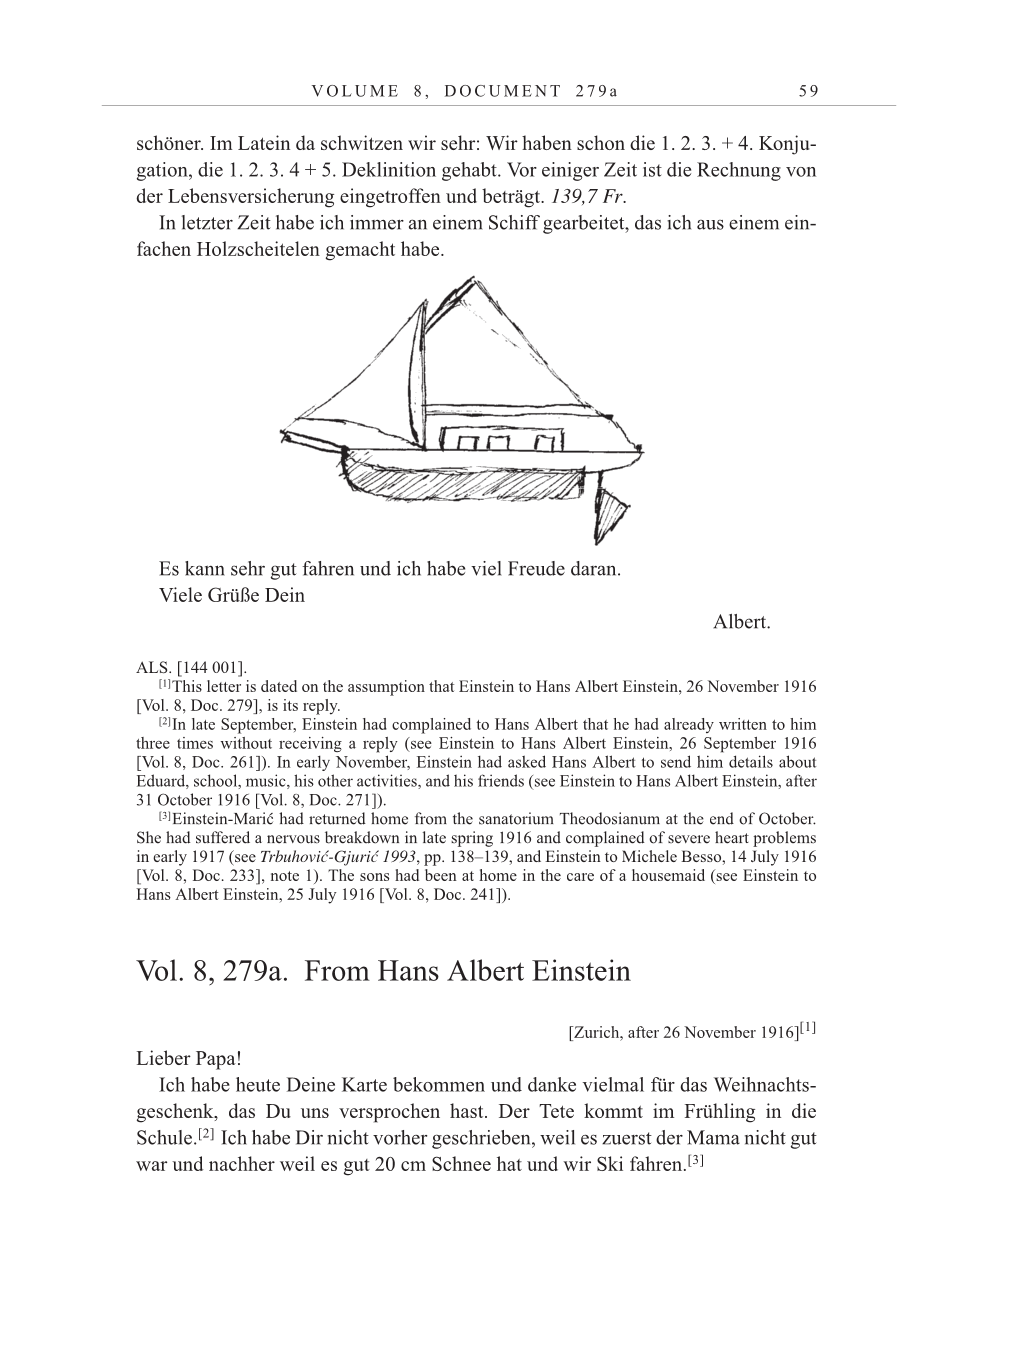 Volume 10: The Berlin Years: Correspondence May-December 1920 / Supplementary Correspondence 1909-1920 page 59